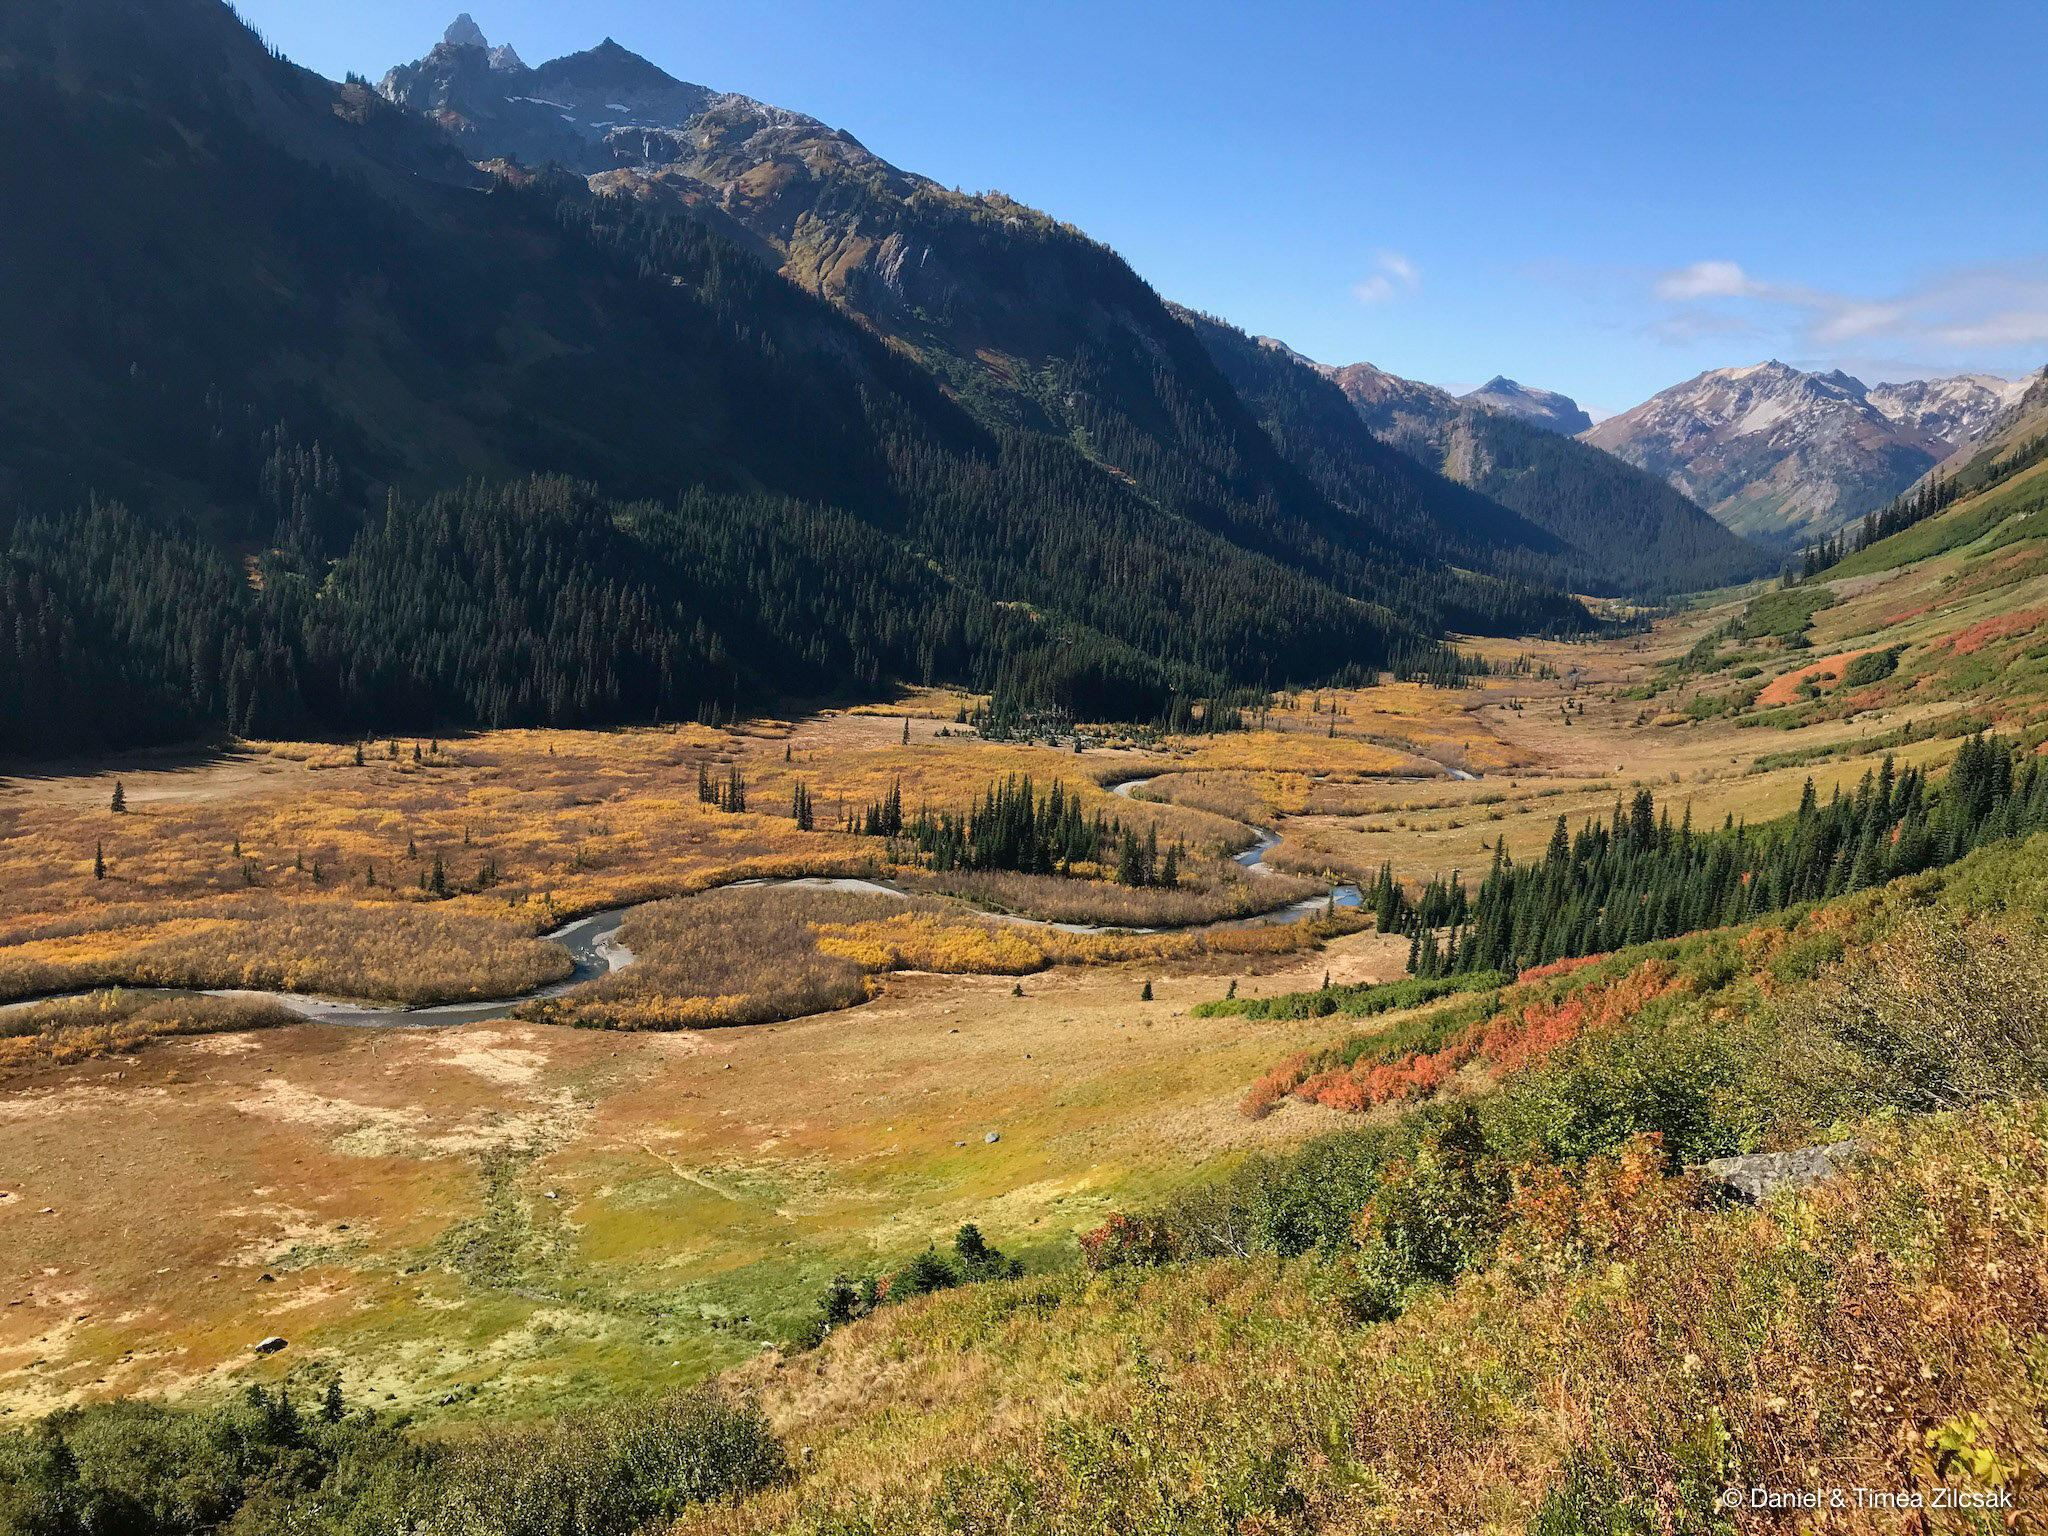 Napeequa Valley seen from the trail ascending towards Little Giant Pass